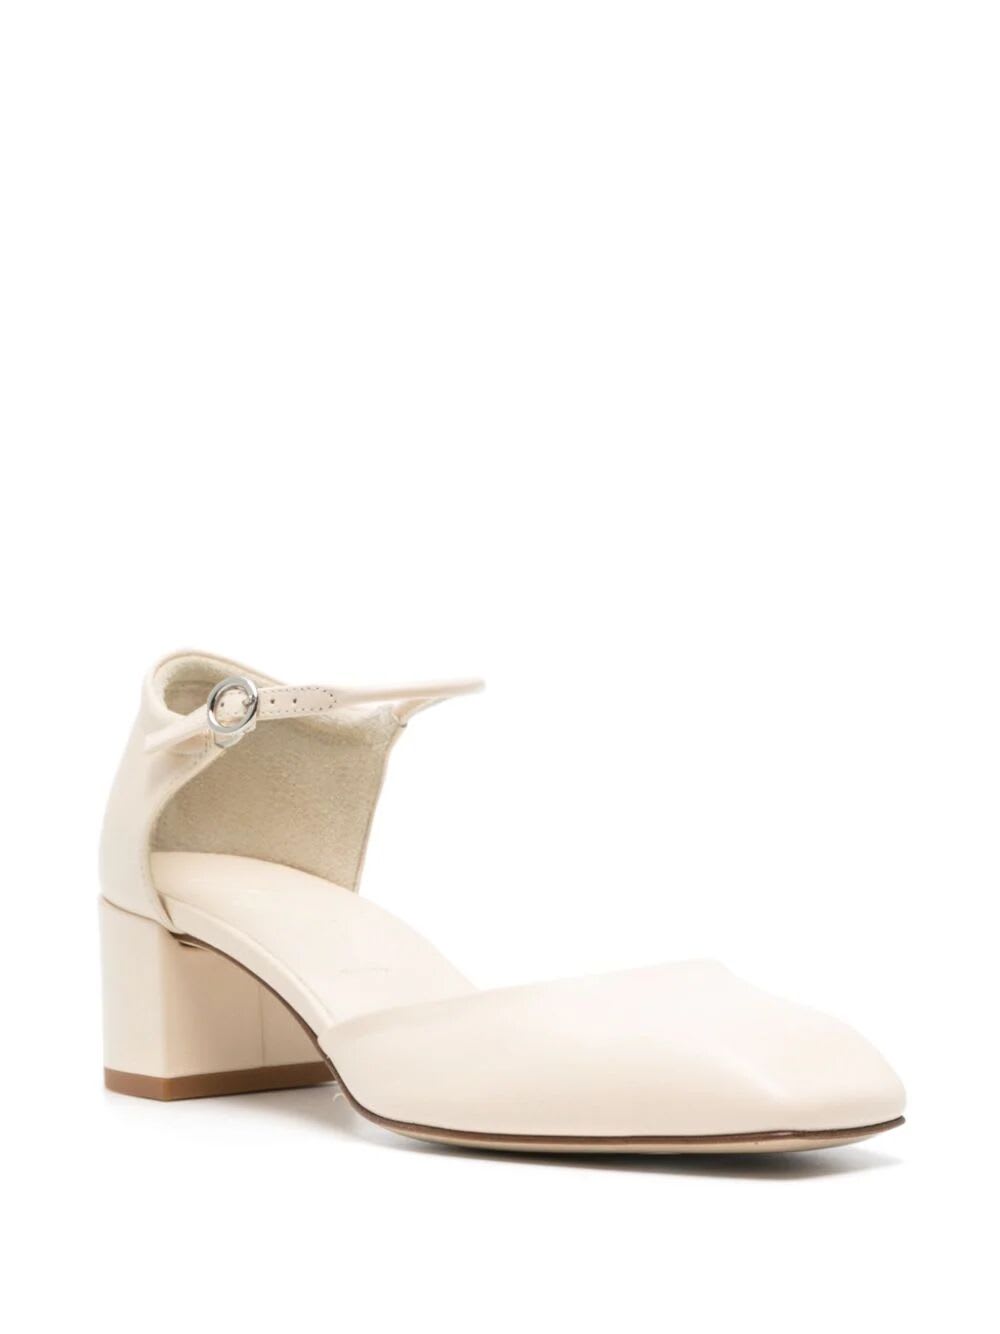 Shop Aeyde Magda Nappa Leather Creamy Shoes